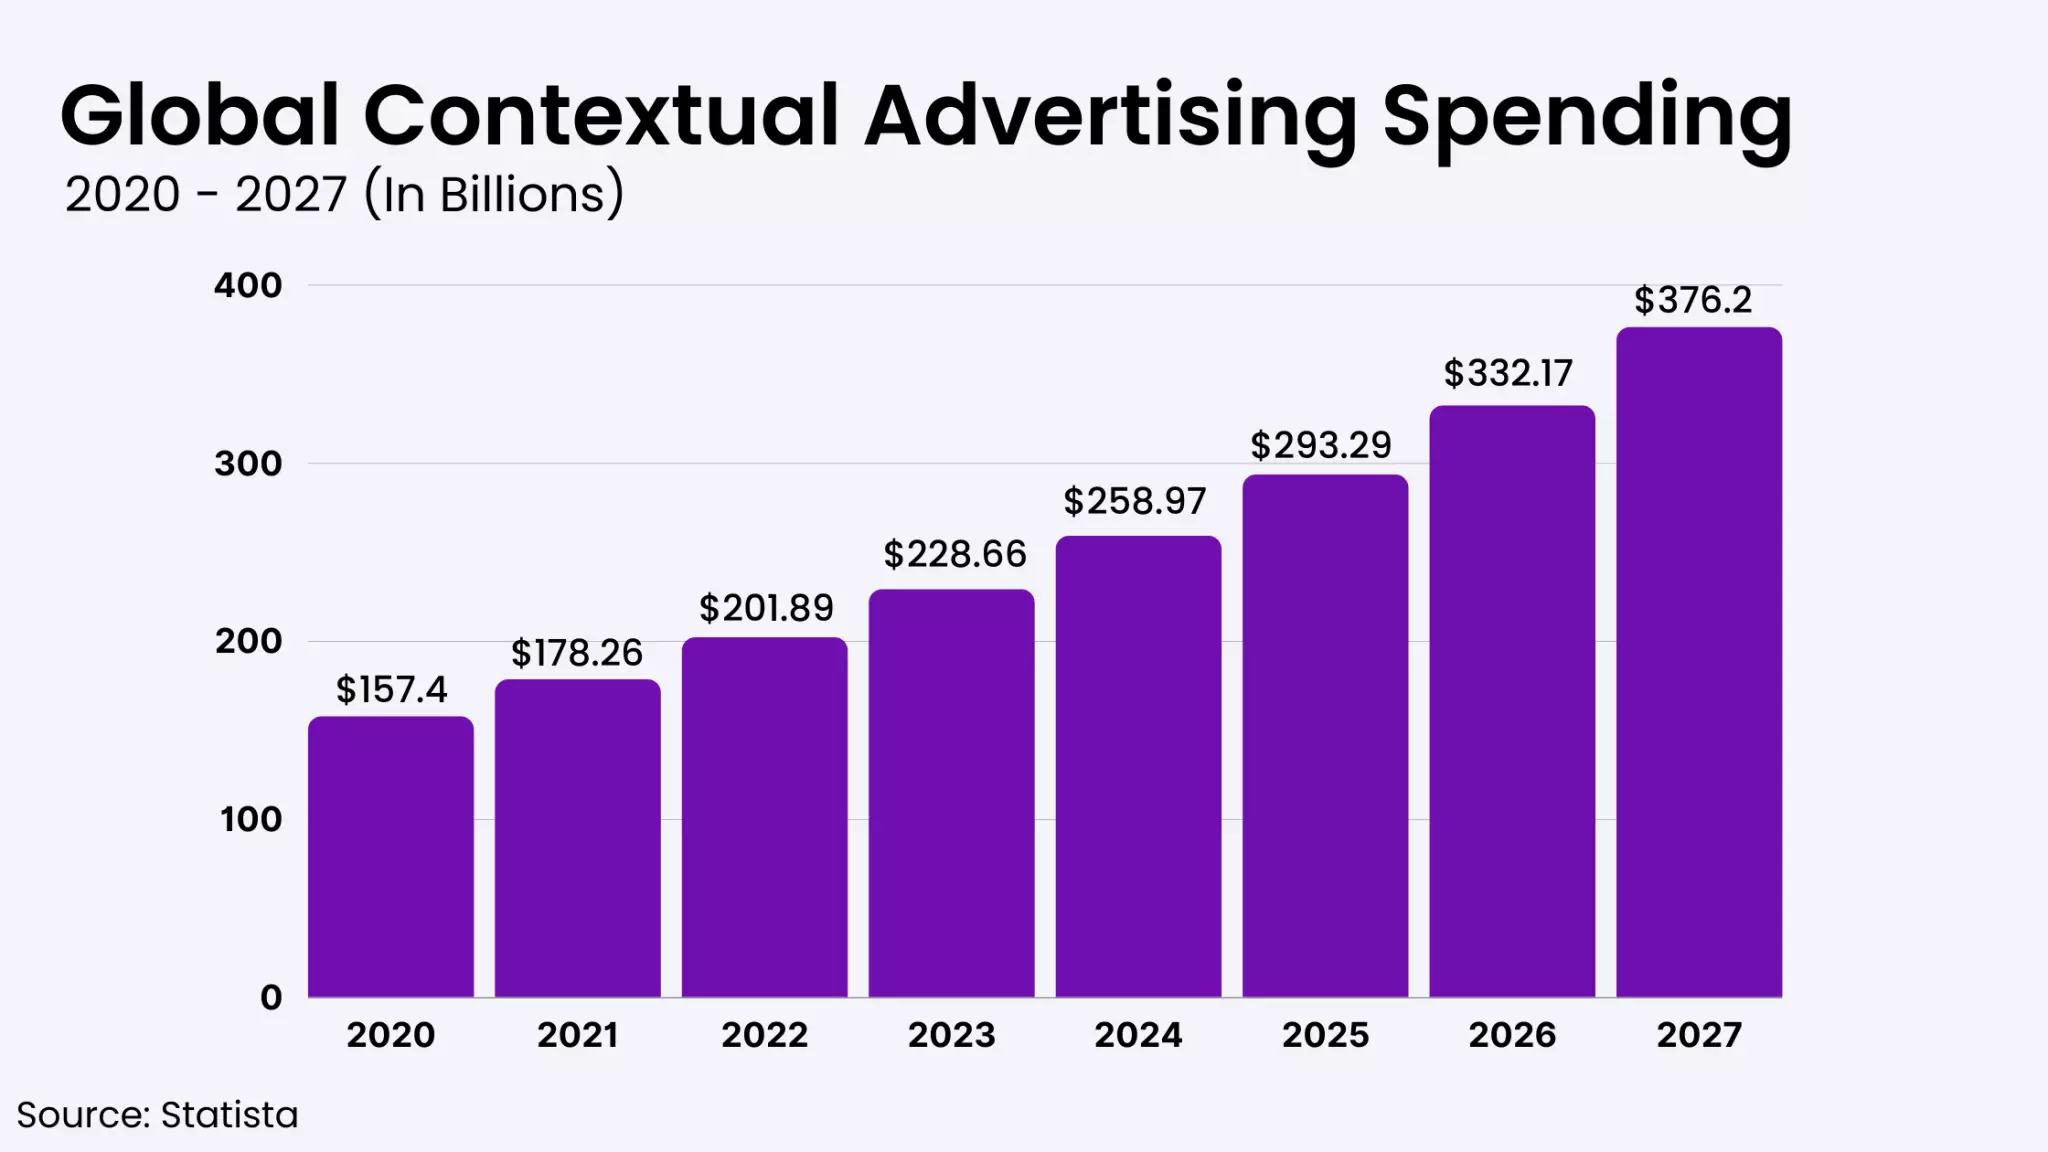 Contextual Advertising Spending Worldwide from 2020 to 2027